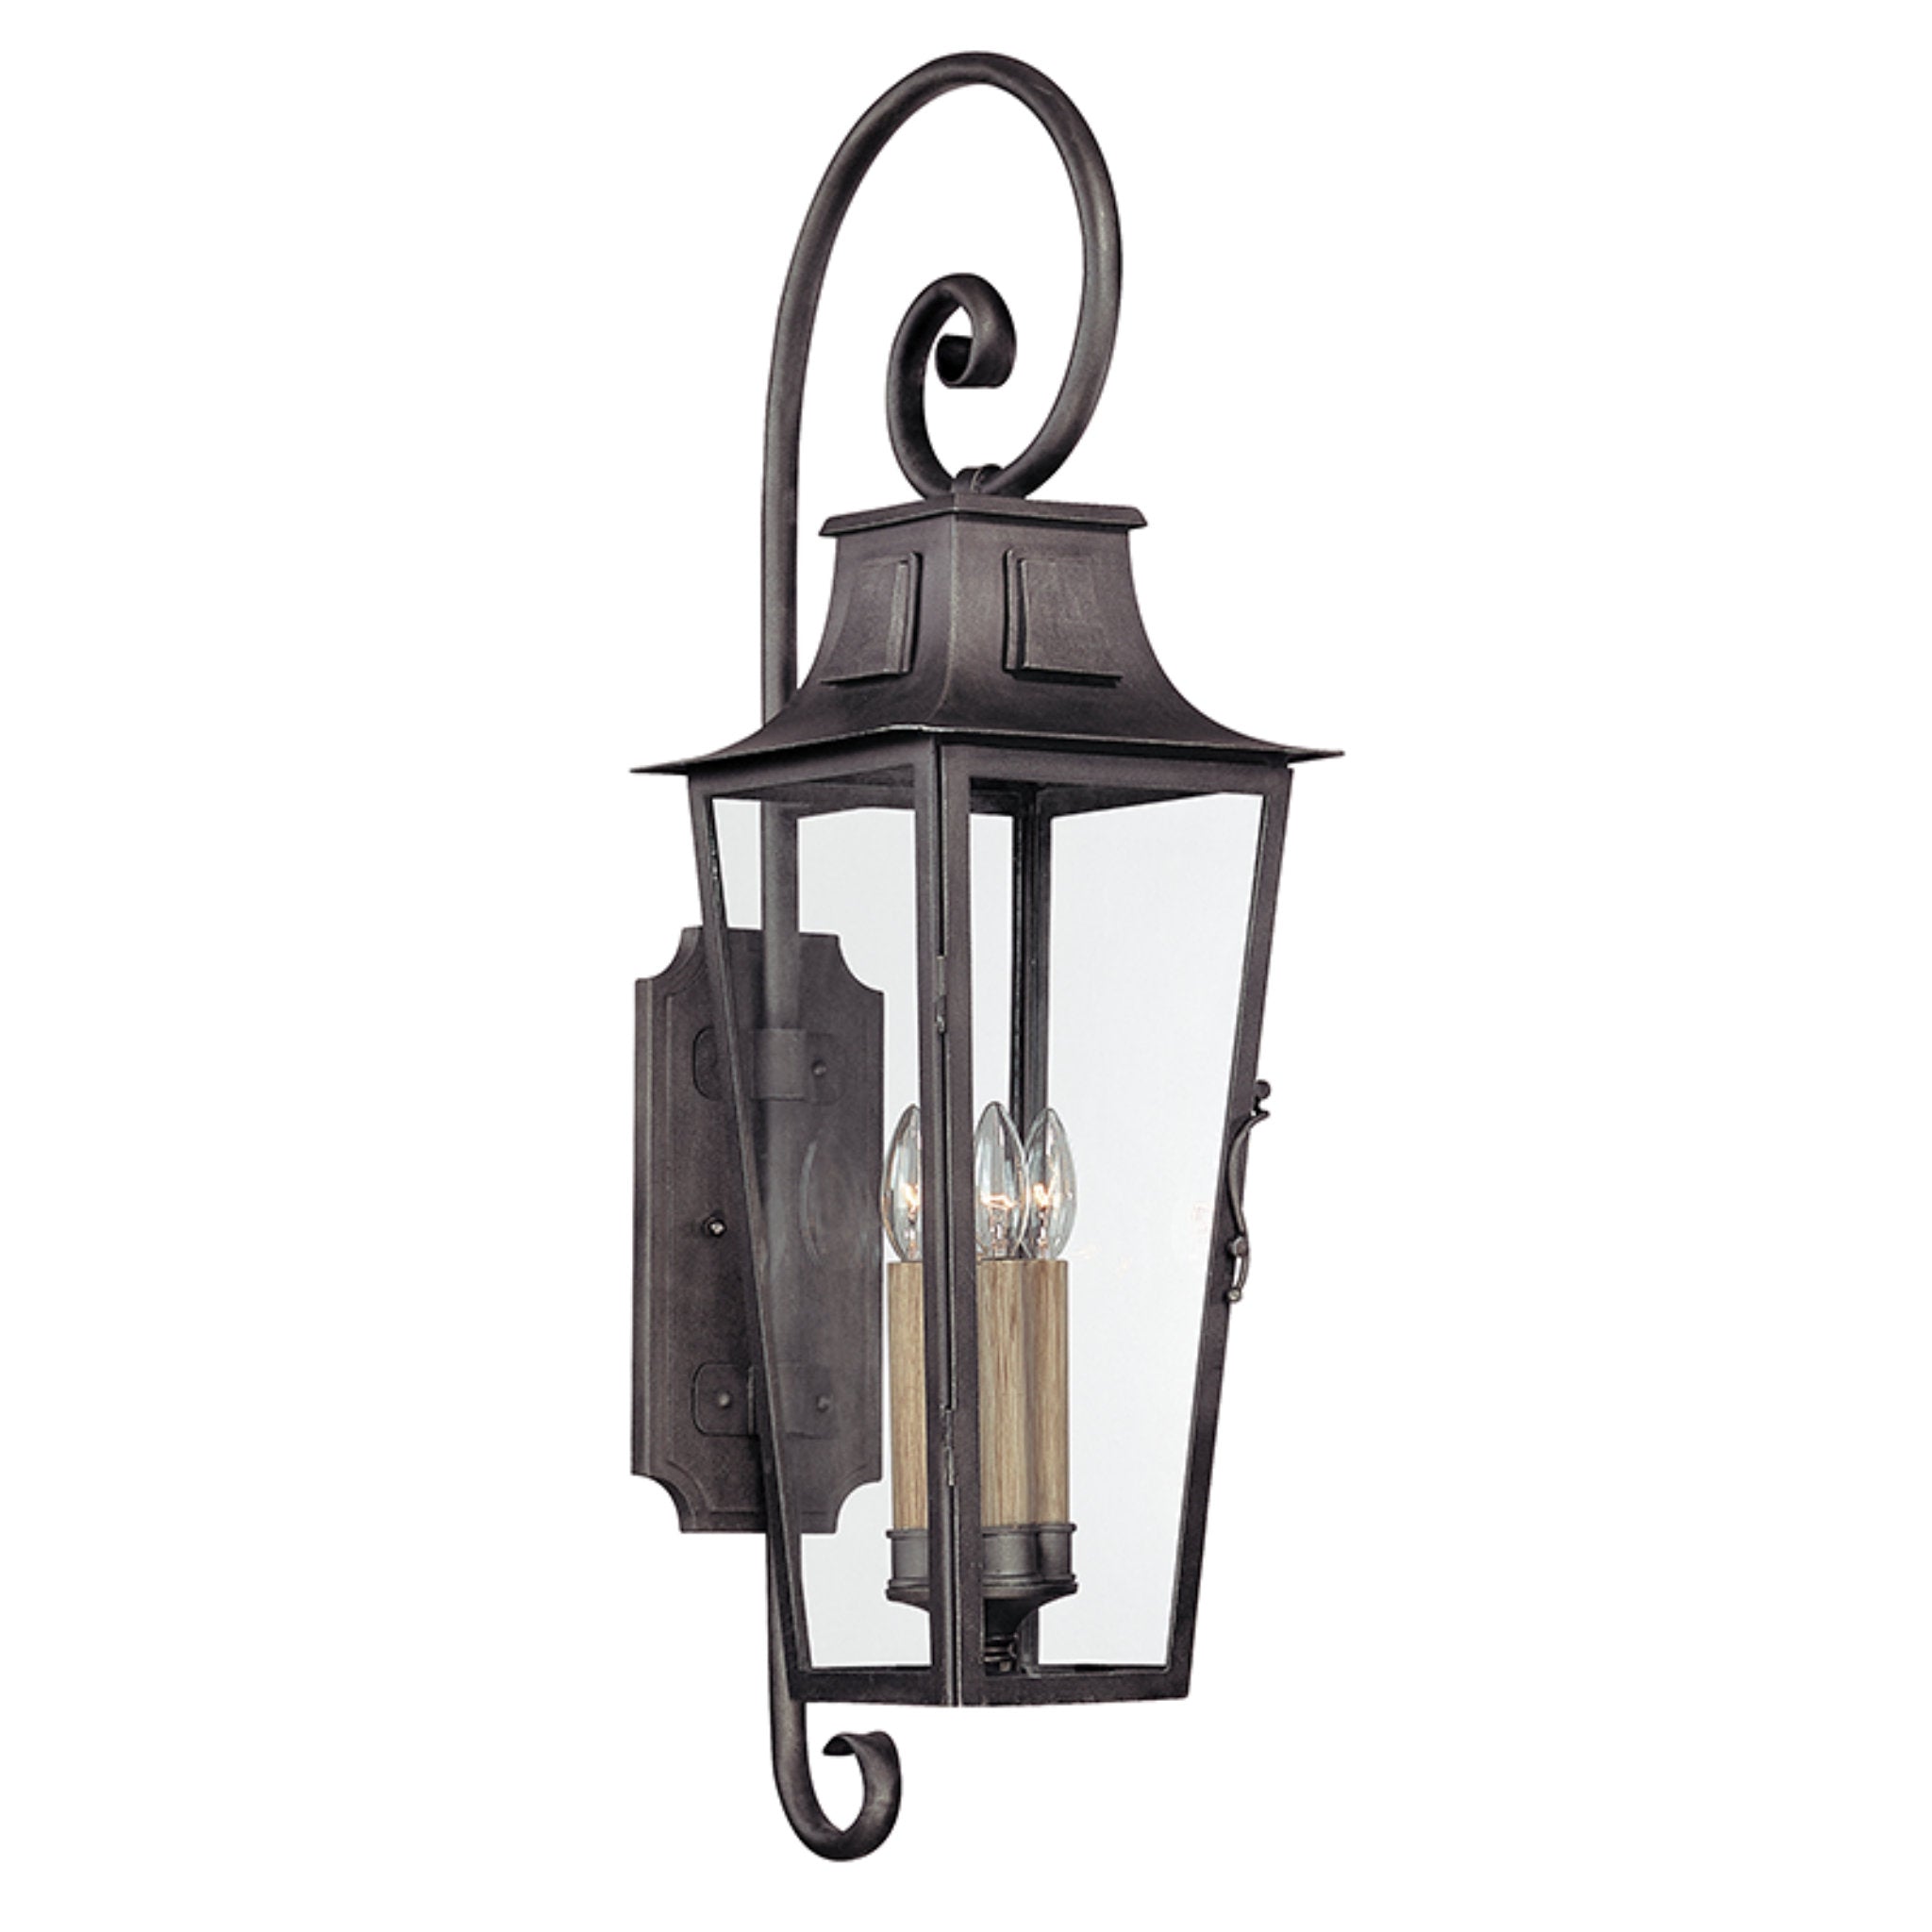 Parisian Square 4 Light Wall Sconce in Aged Pewter